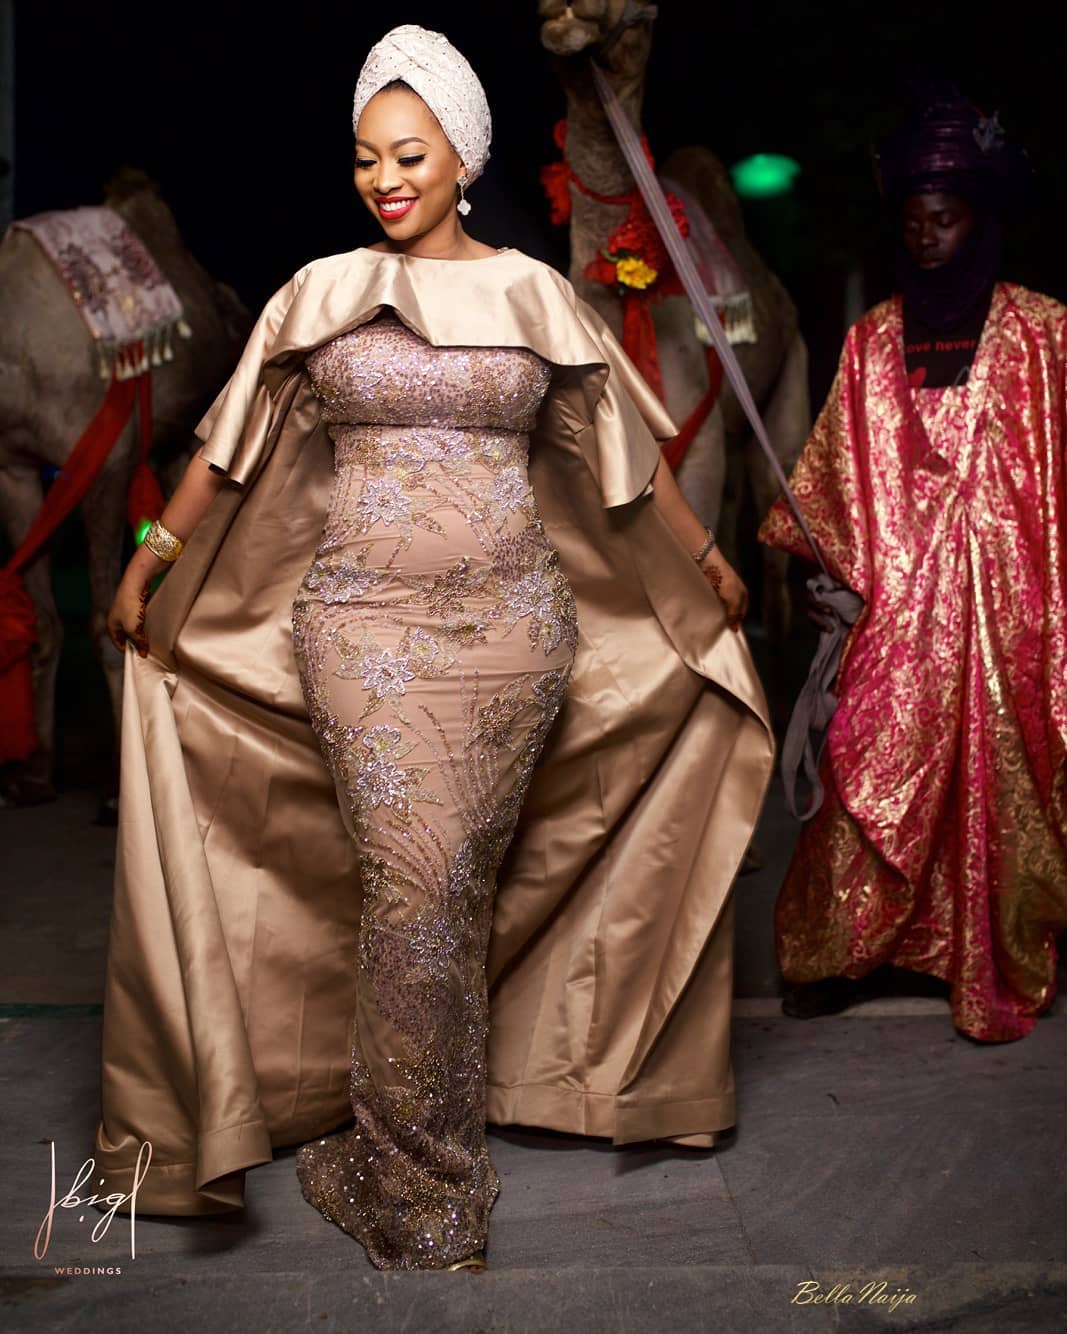  Stunt On Them In These Magnificent Lace Asoebi Styles!